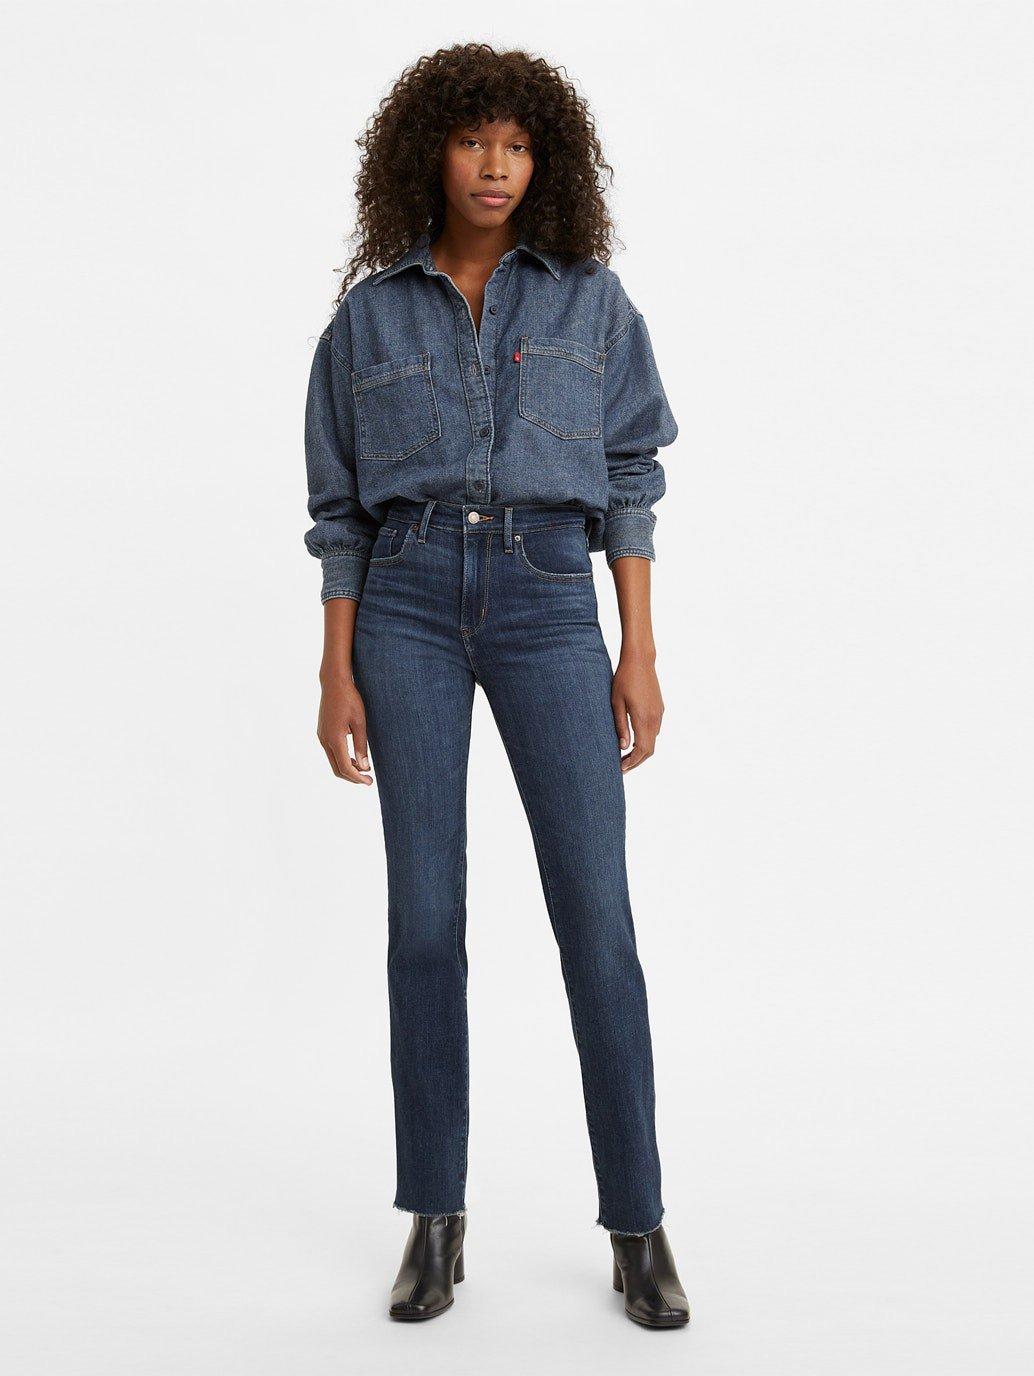 Buy Levi's® Women's 724 High-Rise Straight Jeans | Levi's® Official Online  Store SG